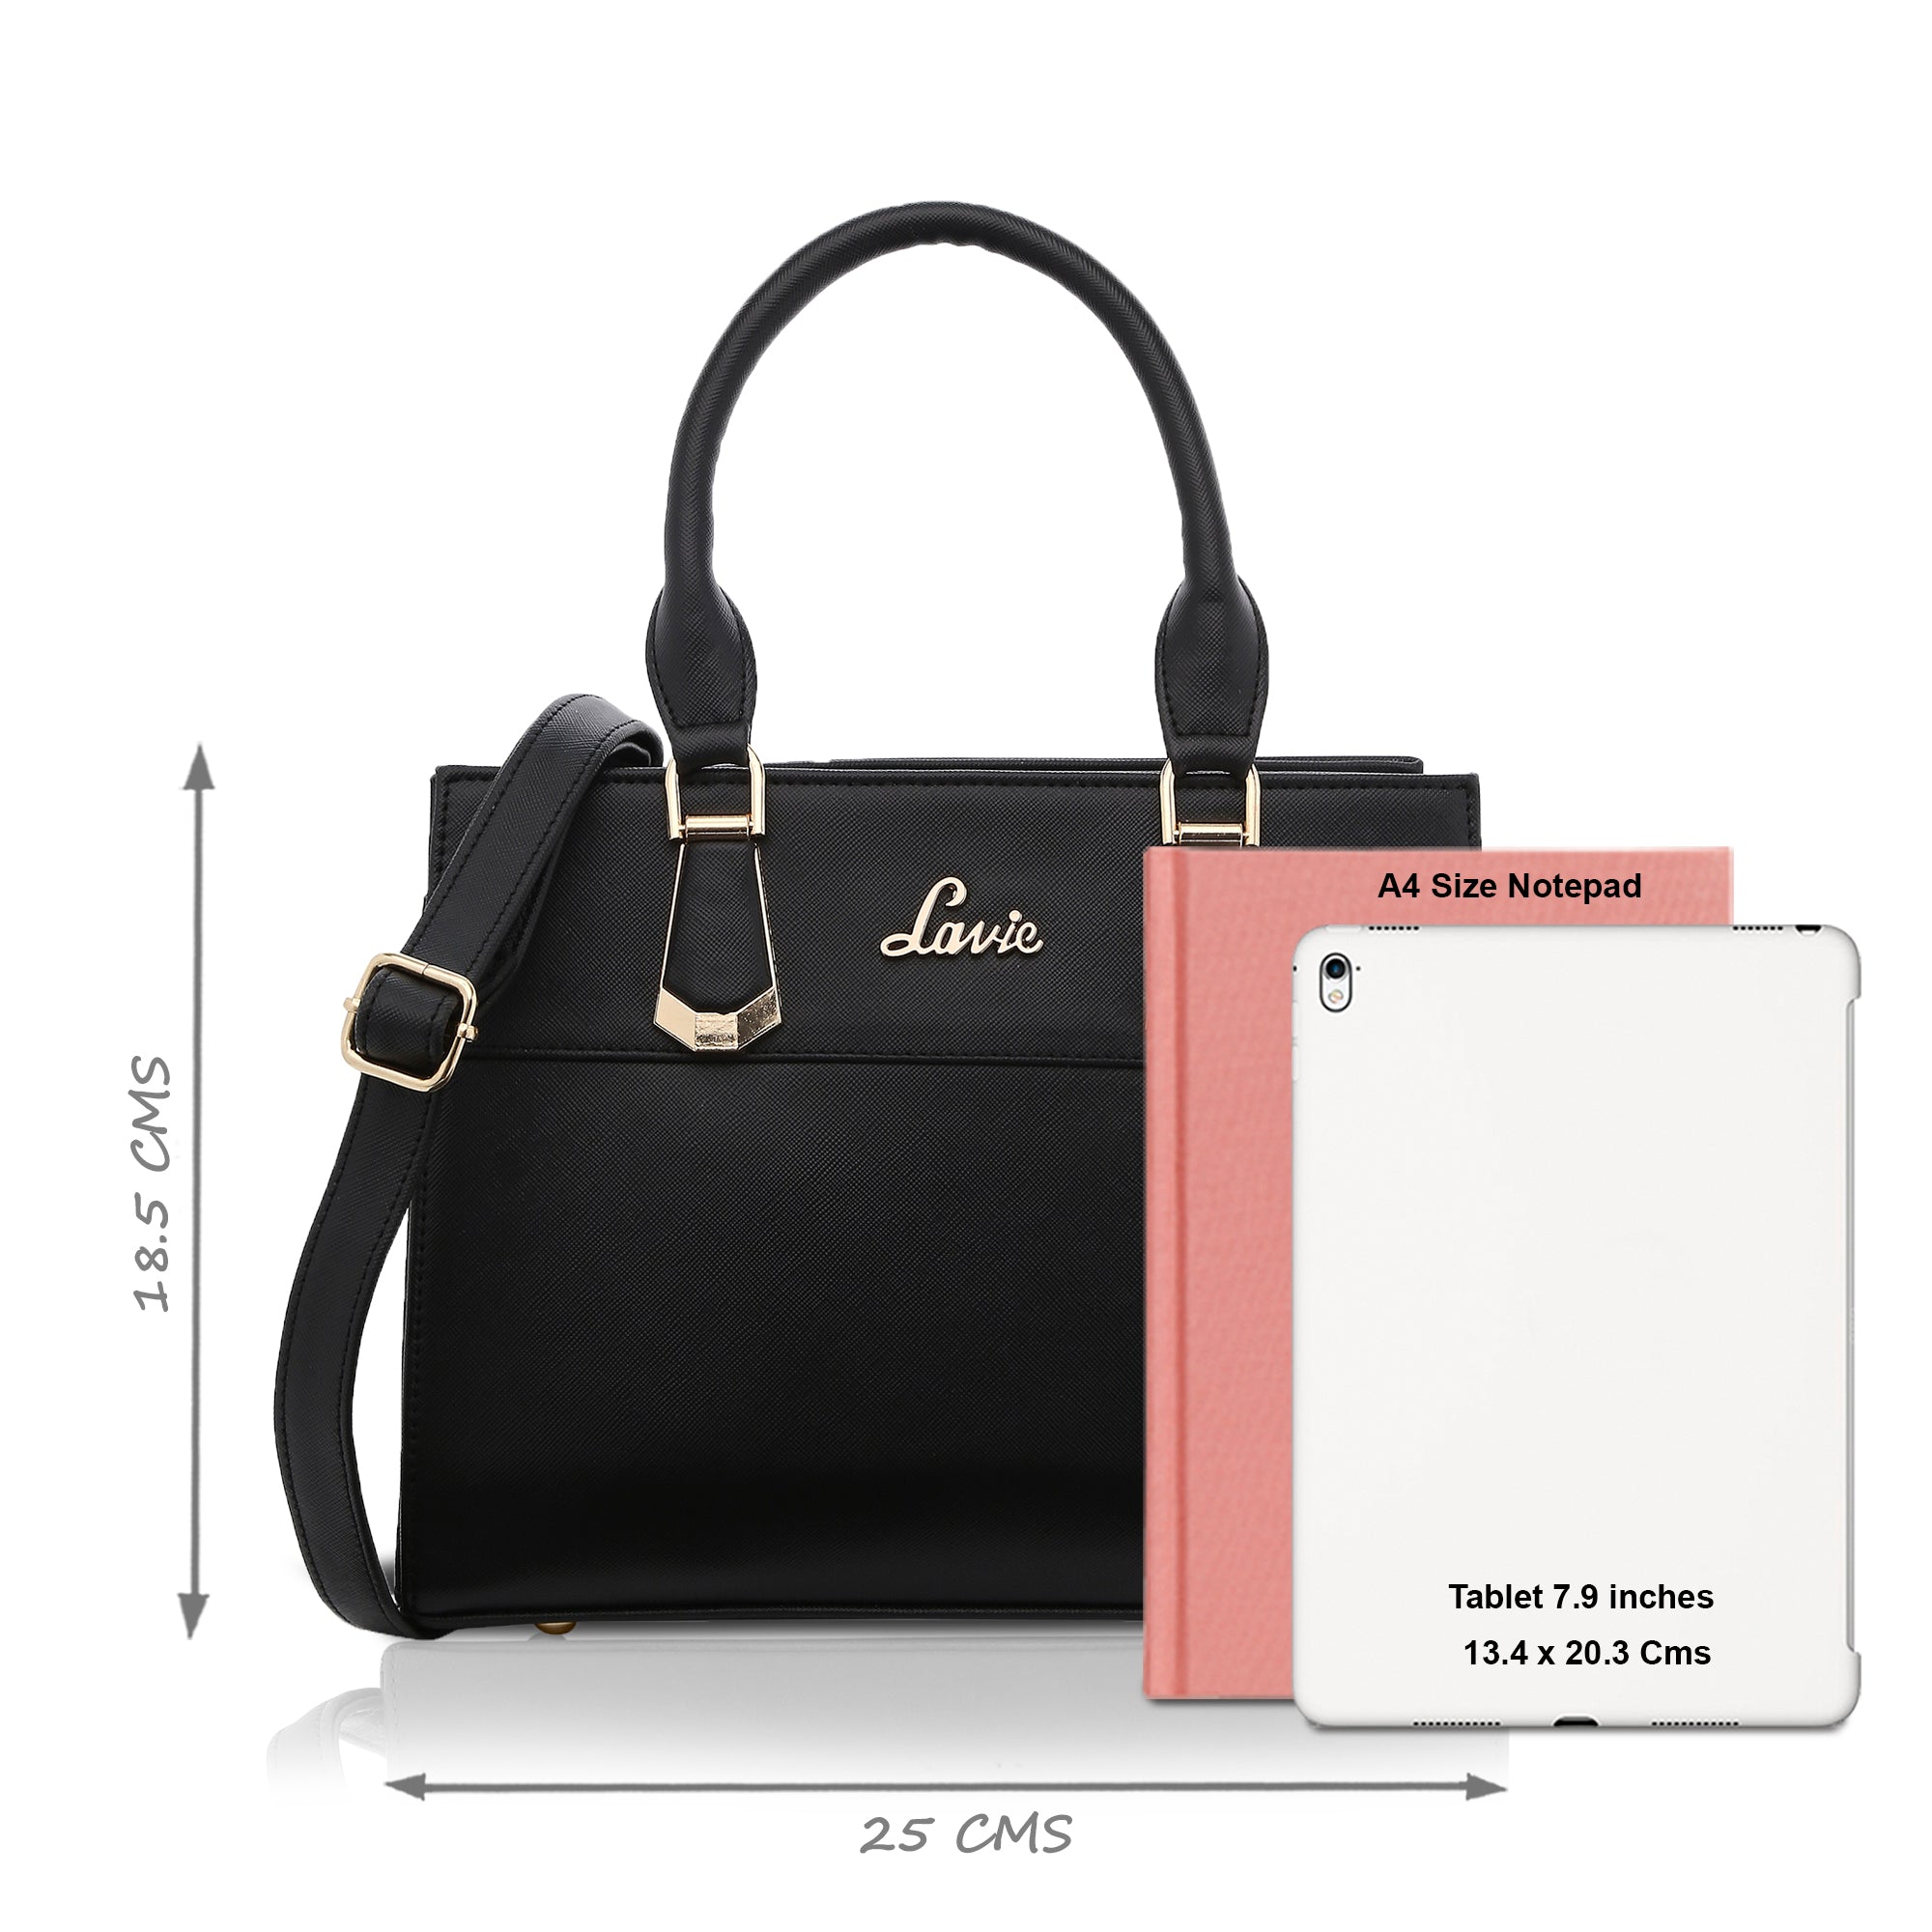 Lavie - BAG 'EM ALL! Stop everything and splurge on the... | Facebook